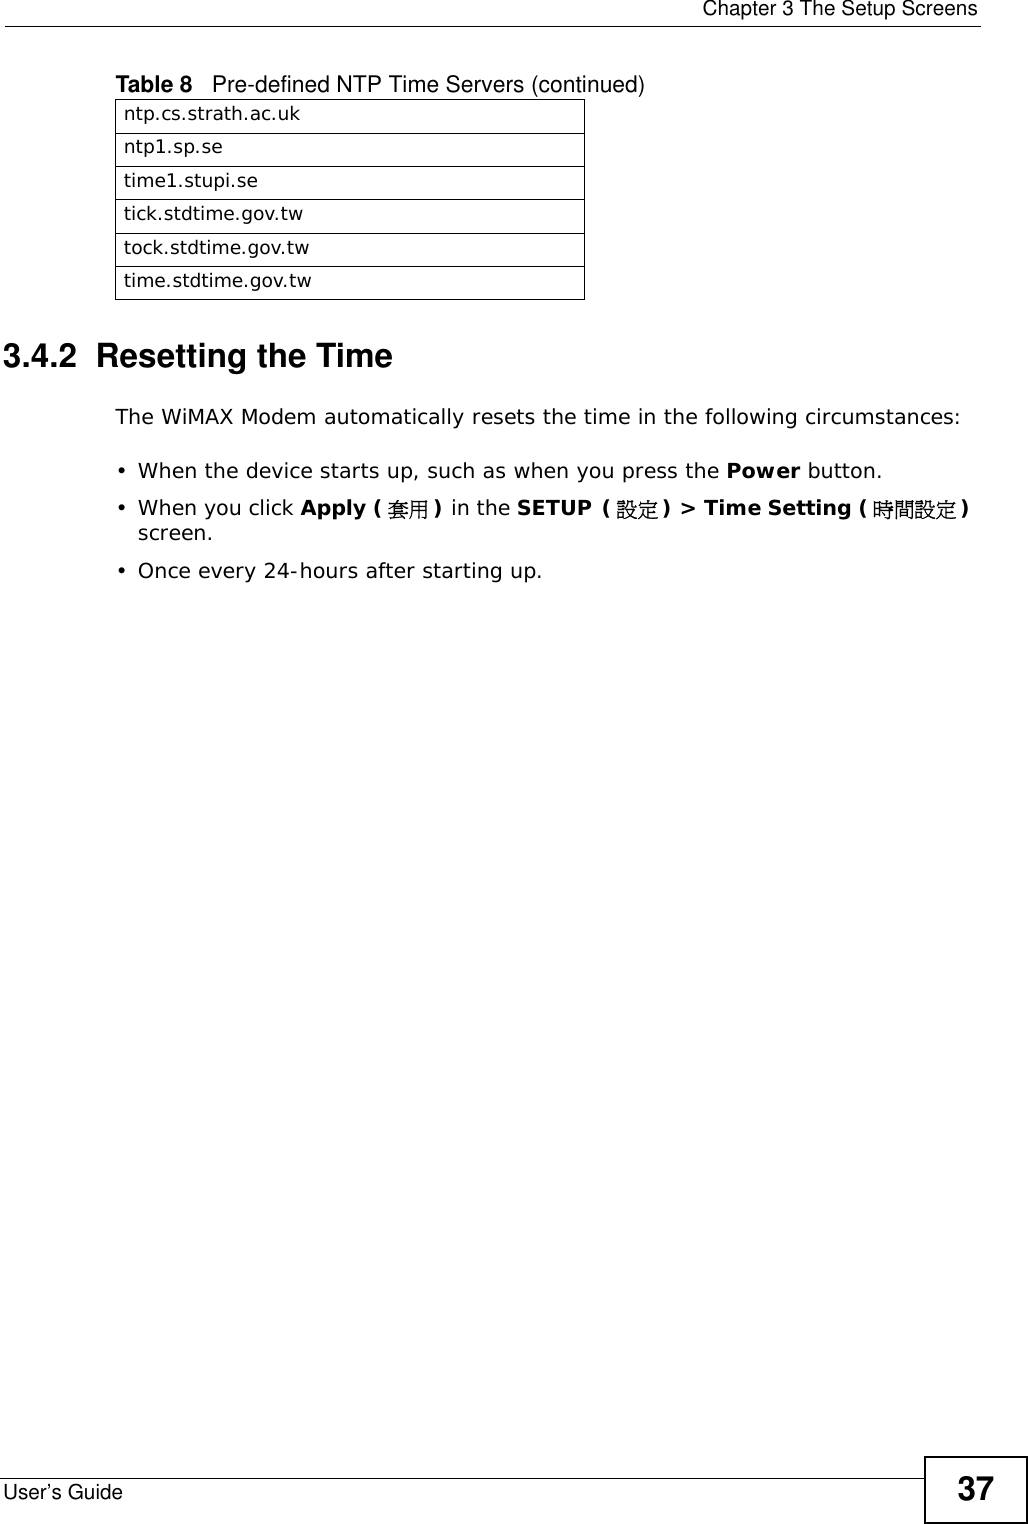  Chapter 3 The Setup ScreensUser’s Guide 373.4.2  Resetting the TimeThe WiMAX Modem automatically resets the time in the following circumstances:• When the device starts up, such as when you press the Power button.• When you click Apply (套用 ) in the SETUP (設定) &gt; Time Setting (時間設定) screen.• Once every 24-hours after starting up.ntp.cs.strath.ac.ukntp1.sp.setime1.stupi.setick.stdtime.gov.twtock.stdtime.gov.twtime.stdtime.gov.twTable 8   Pre-defined NTP Time Servers (continued)